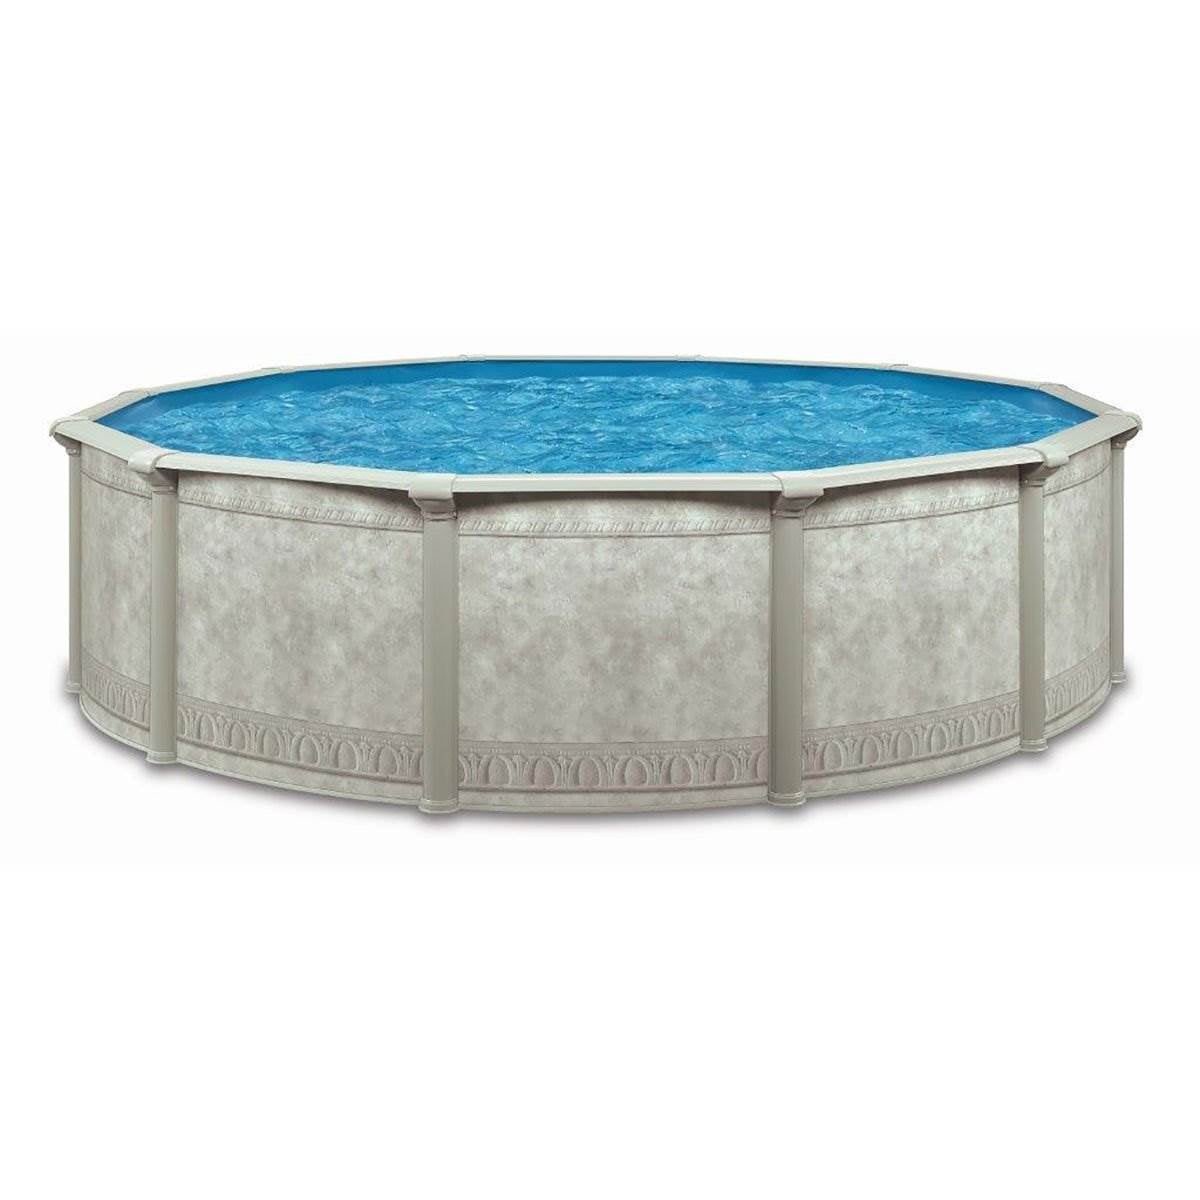 Latest 24X52 Above Ground Swimming Pool Information